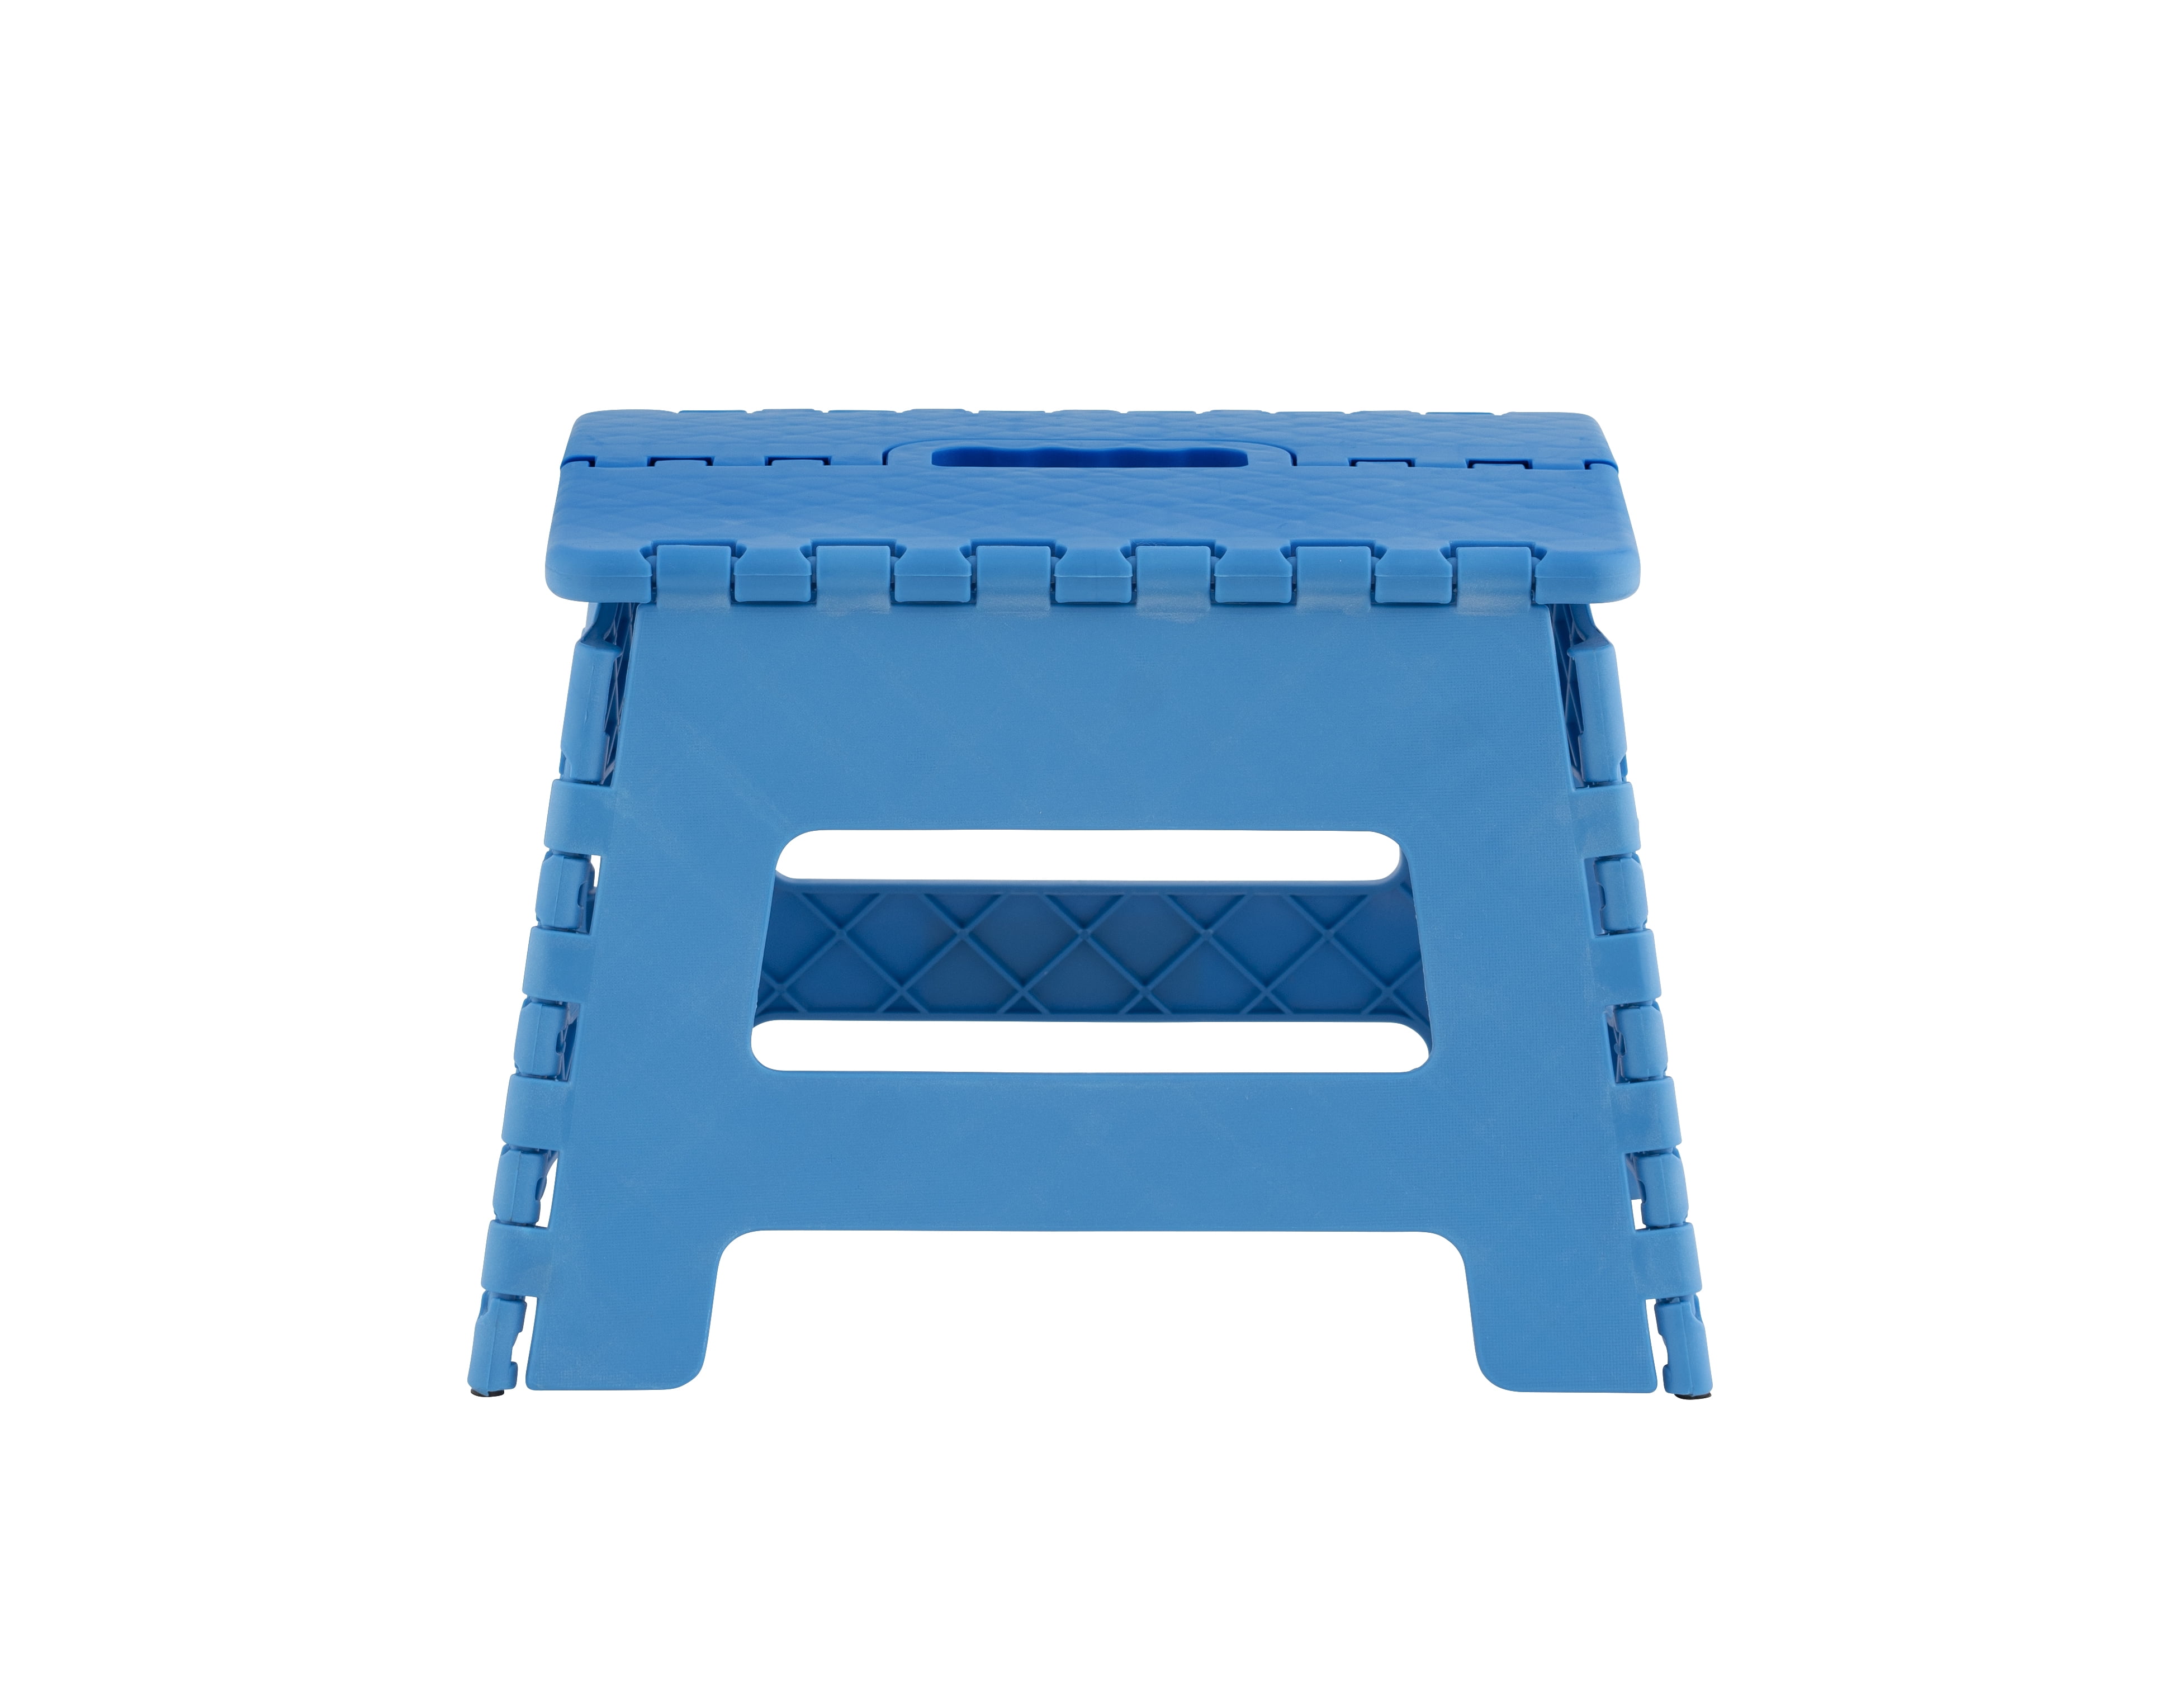 STEP STOOL 9" PLASTIC PORTABLE FOLDABLE KIDS CHAIR STORE FLAT FOLDING OUTDOOR 